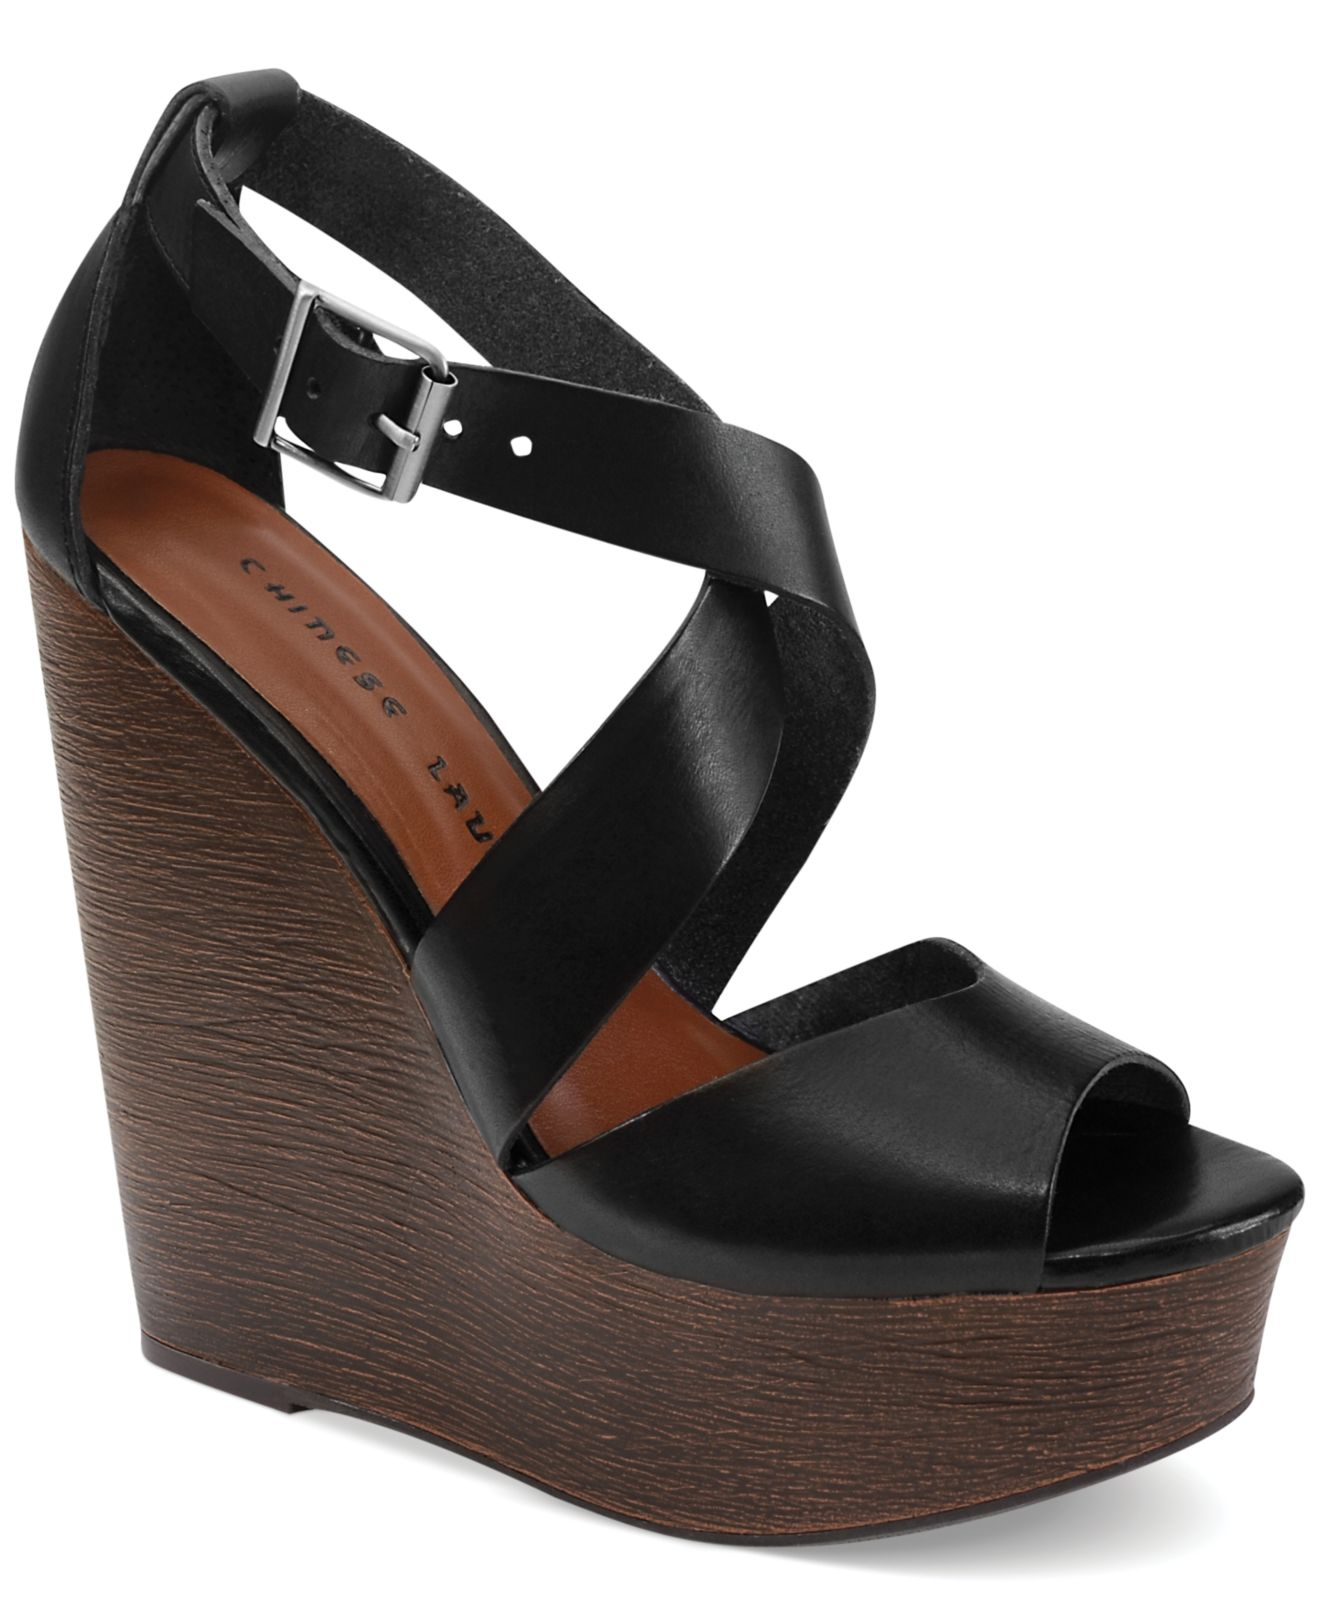 Lyst - Chinese Laundry Java Platform Wedge Sandals in Black